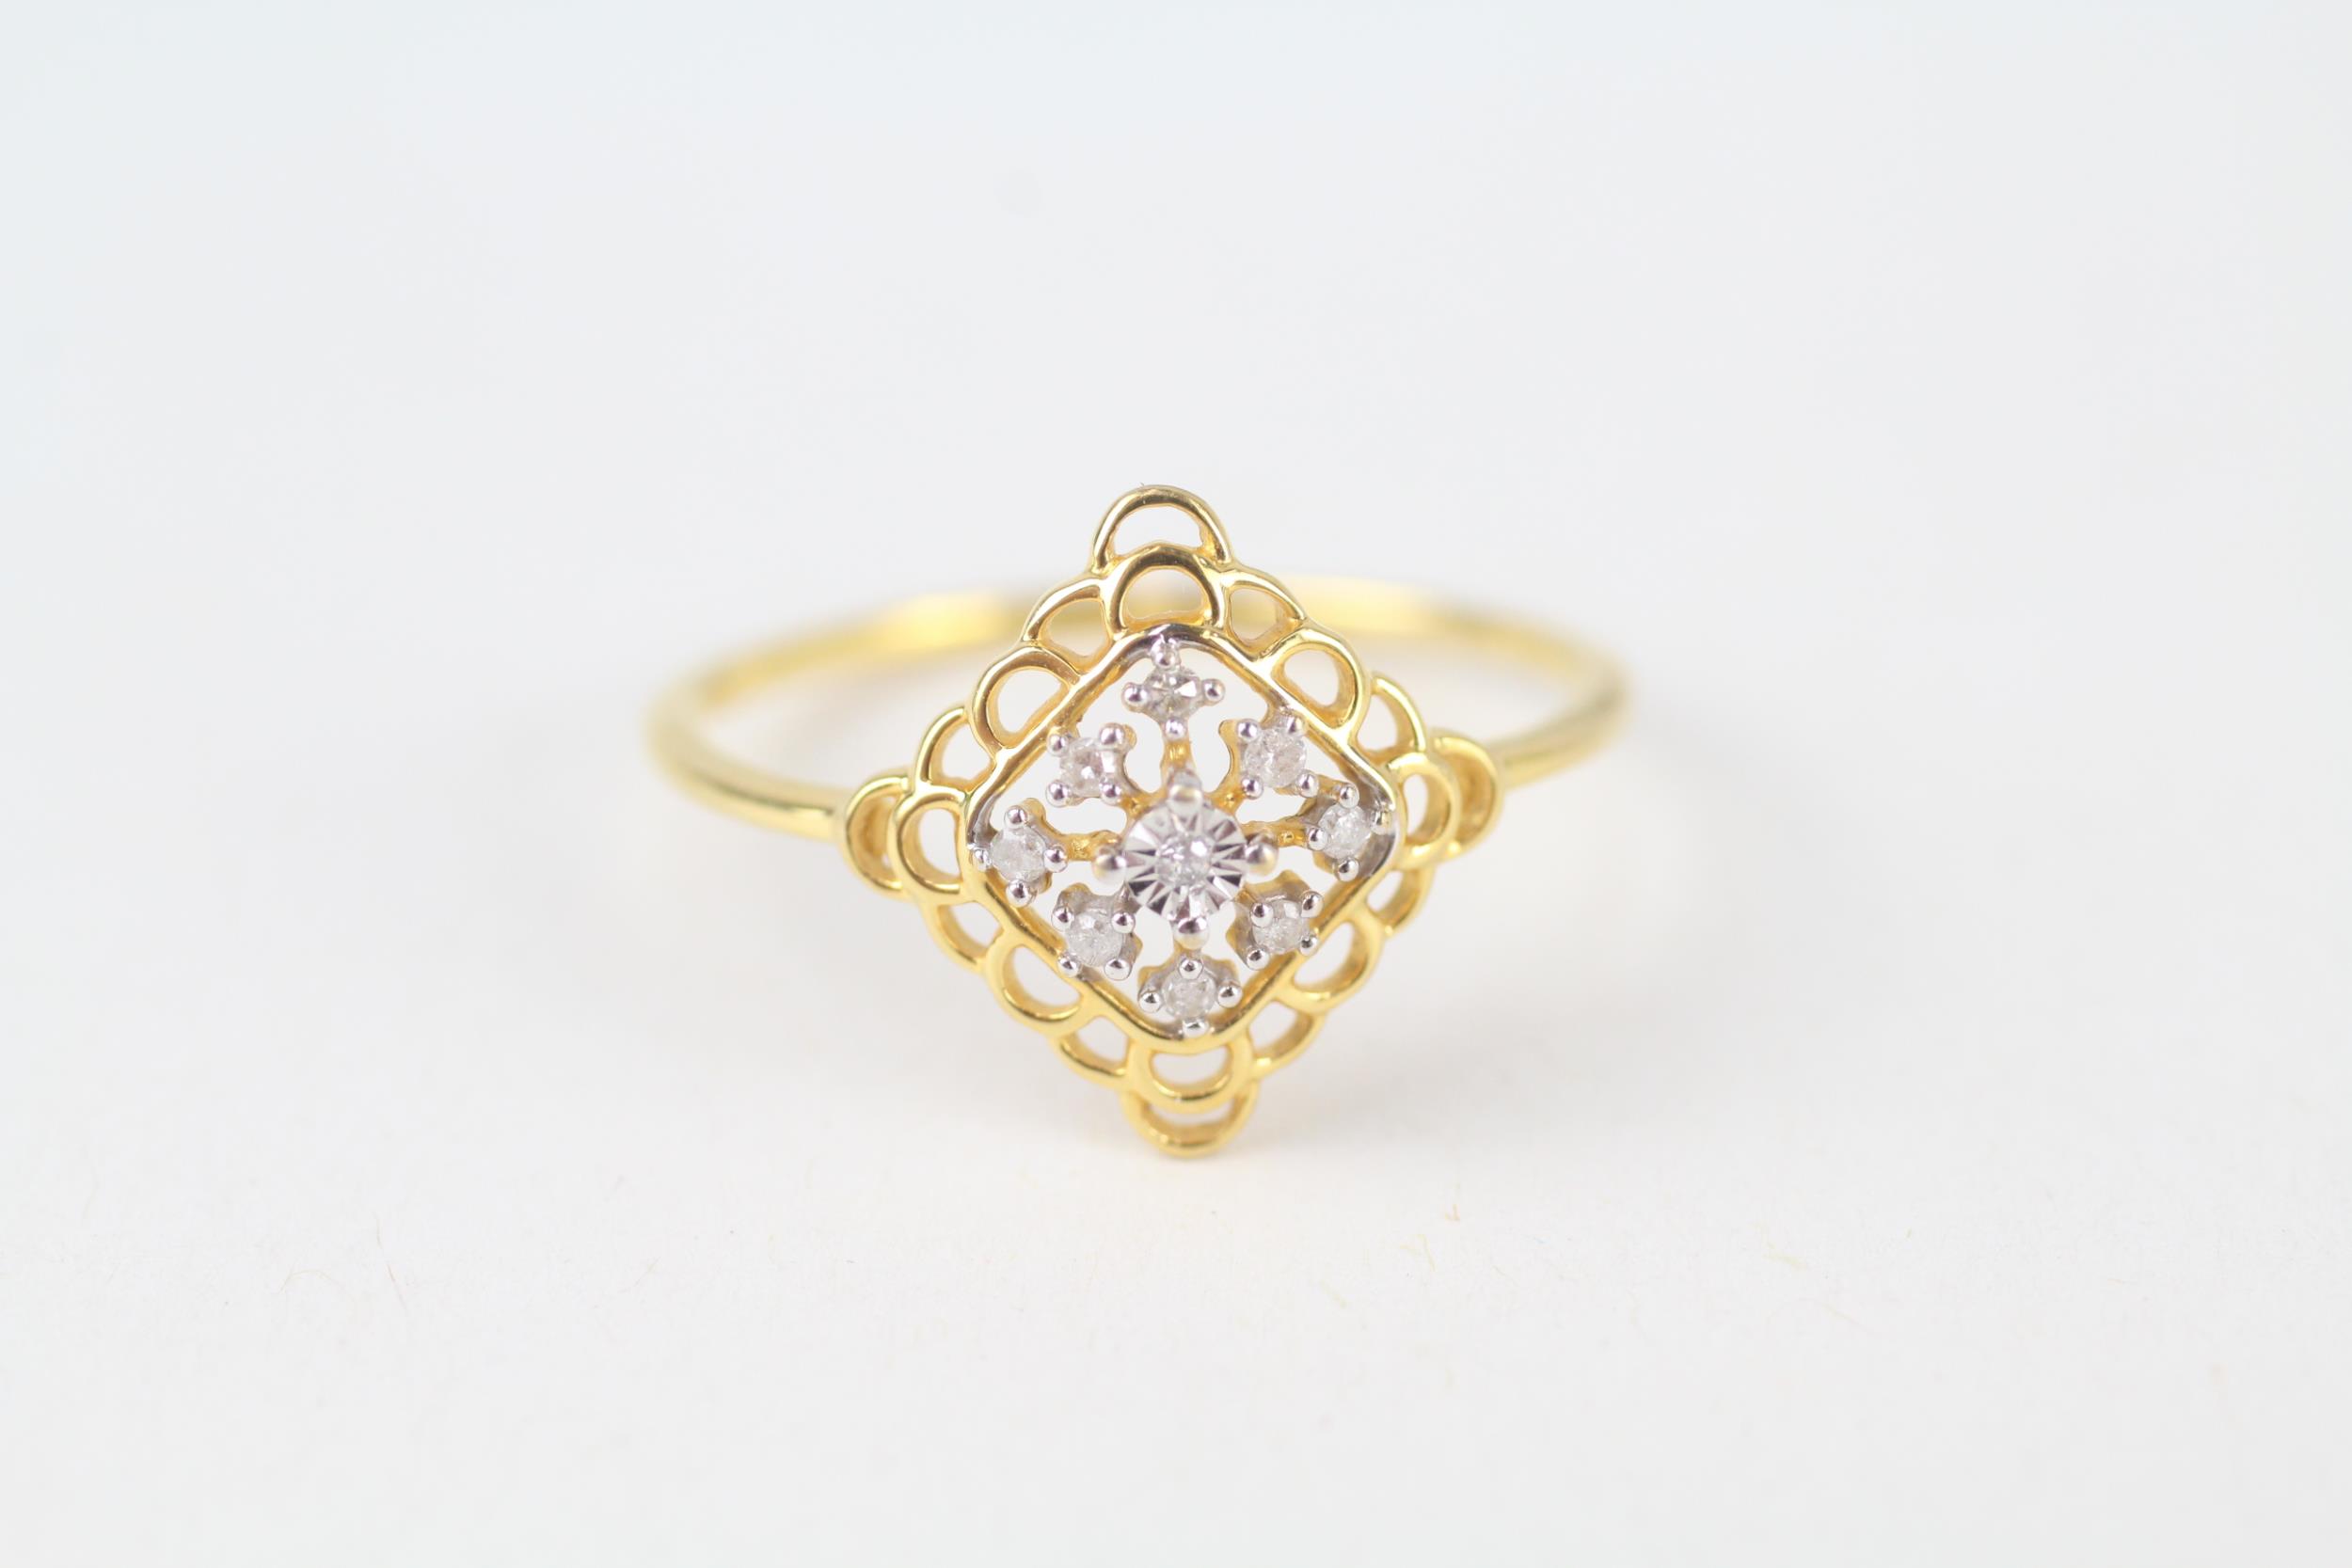 9ct gold diamond cluster openwork ring Size R 1/2 1.3 g - Image 2 of 5